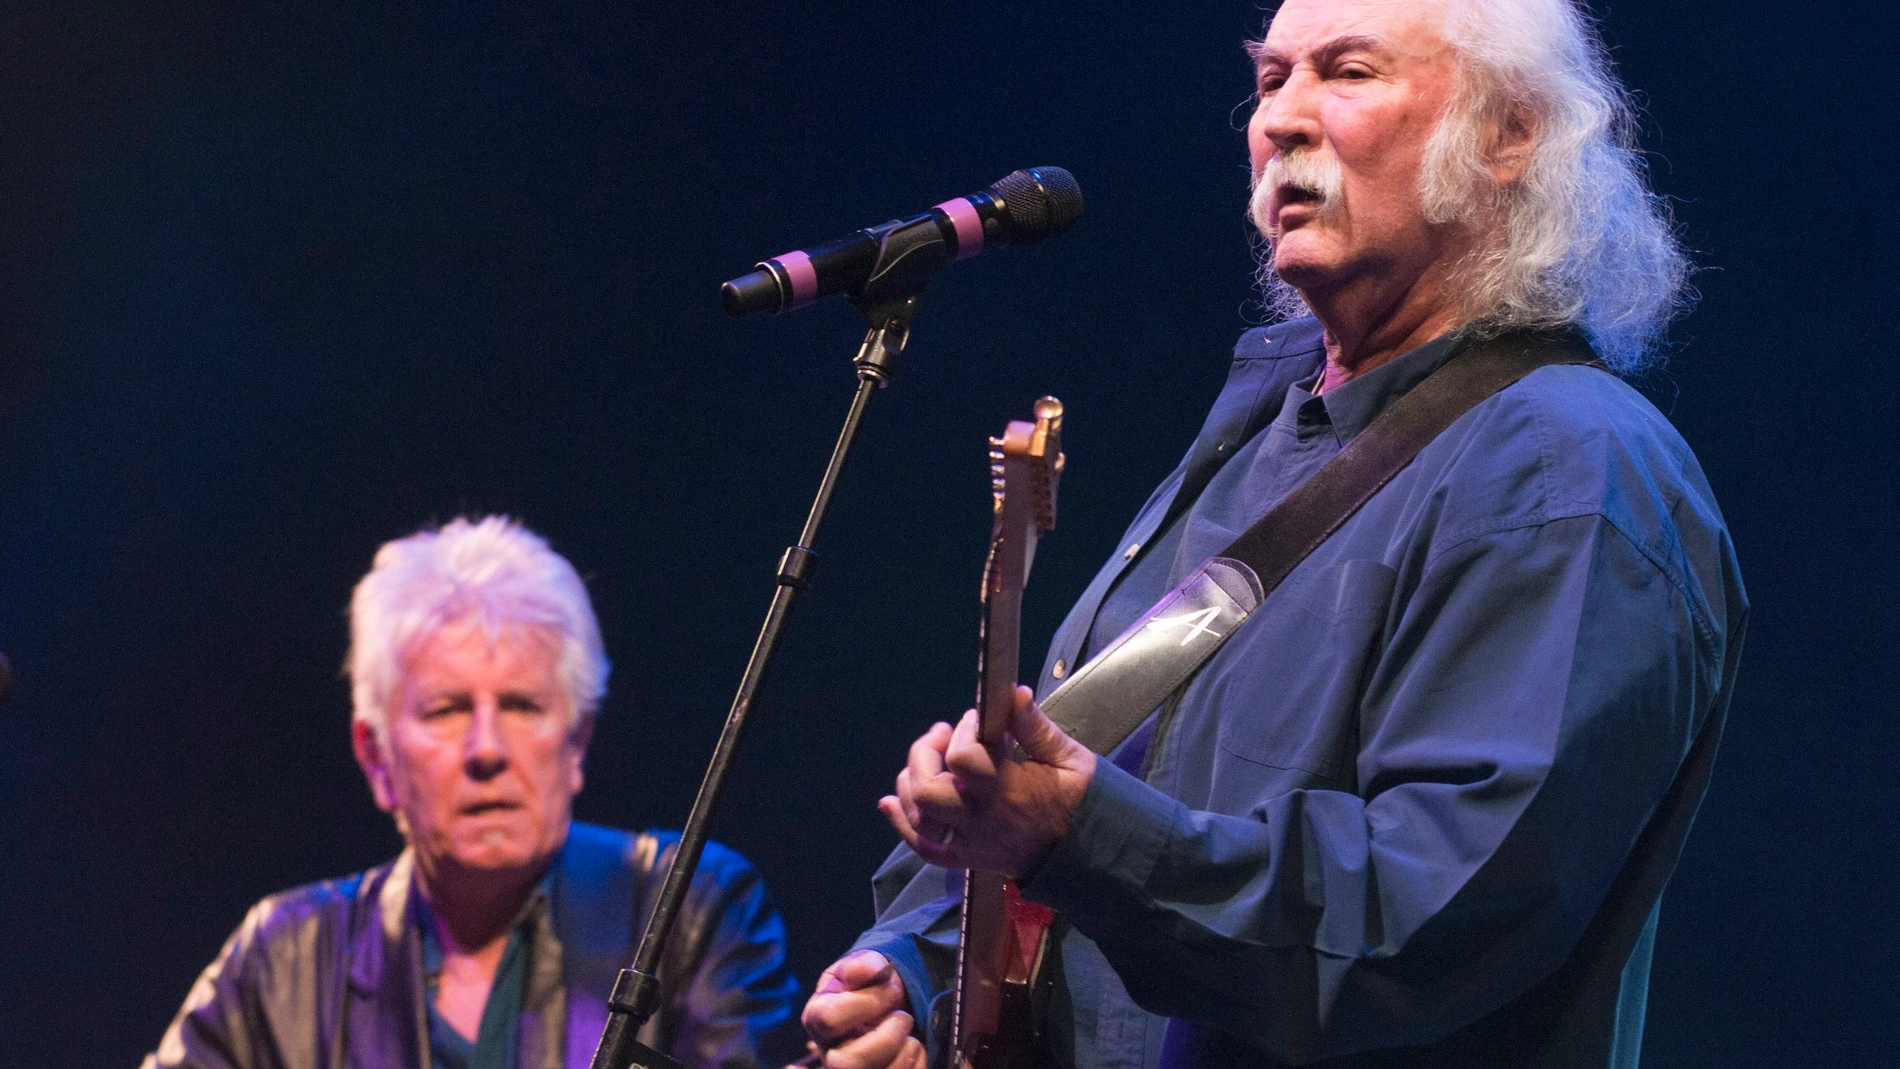 Tucson (United States).- (FILE) - US musicians David Crosby (R) and Graham Nash (L) perform at a benefit concert in Tucson, USA, on 10 March 2011 (reissued 19 January 2023). Crosby, the singer-songwriter who cofounded The Byrds and Crosby, Stills & Nash, has died at the the age of 81 his publicist has confirmed. (Estados Unidos) EFE/EPA/GARY WILLIAMS *** Local Caption *** 02627006 